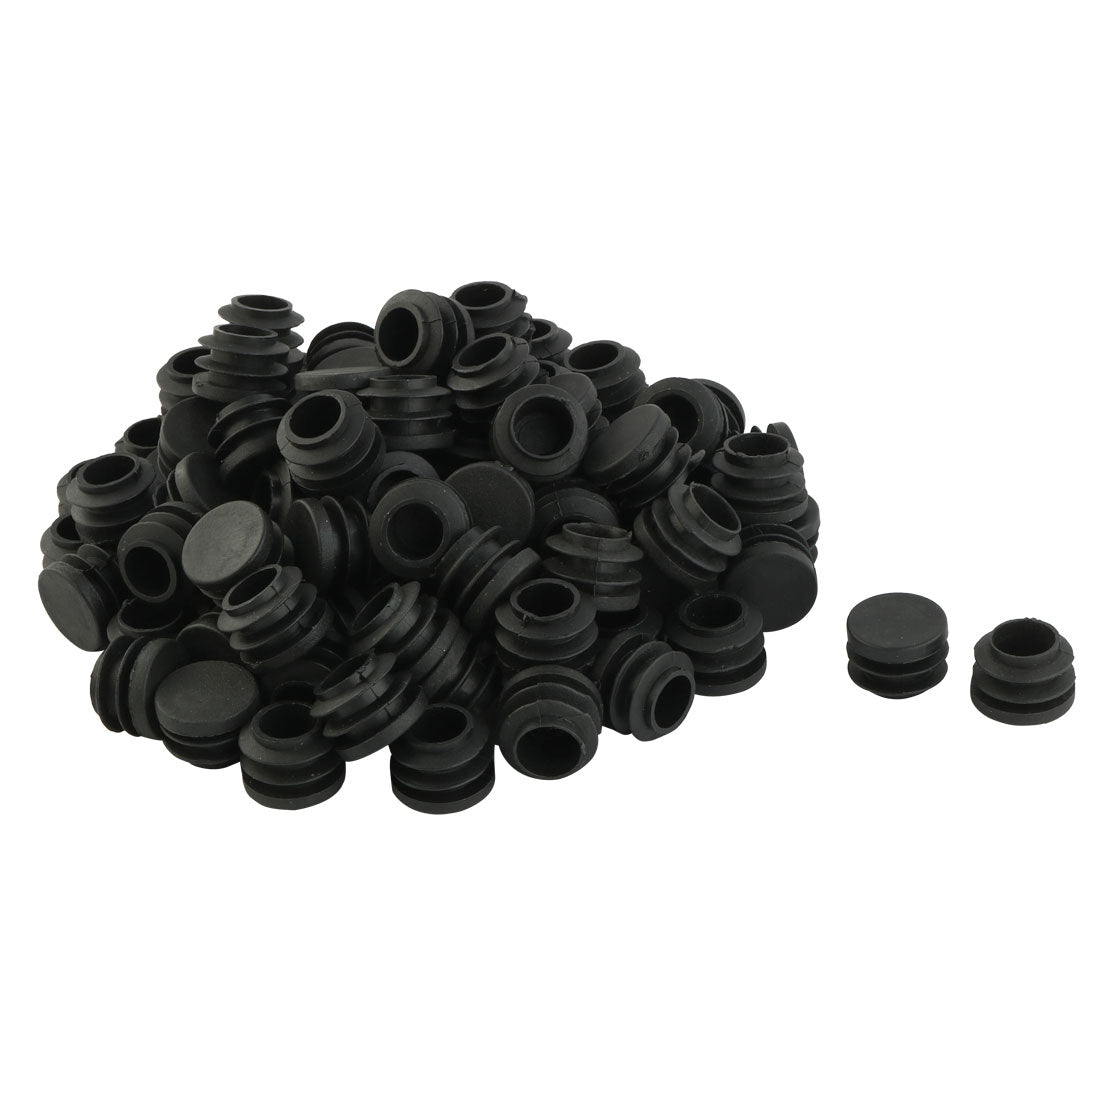 uxcell Uxcell 19mm Dia Plastic Round Tube Inserts End Blanking Caps Black 100 Pcs